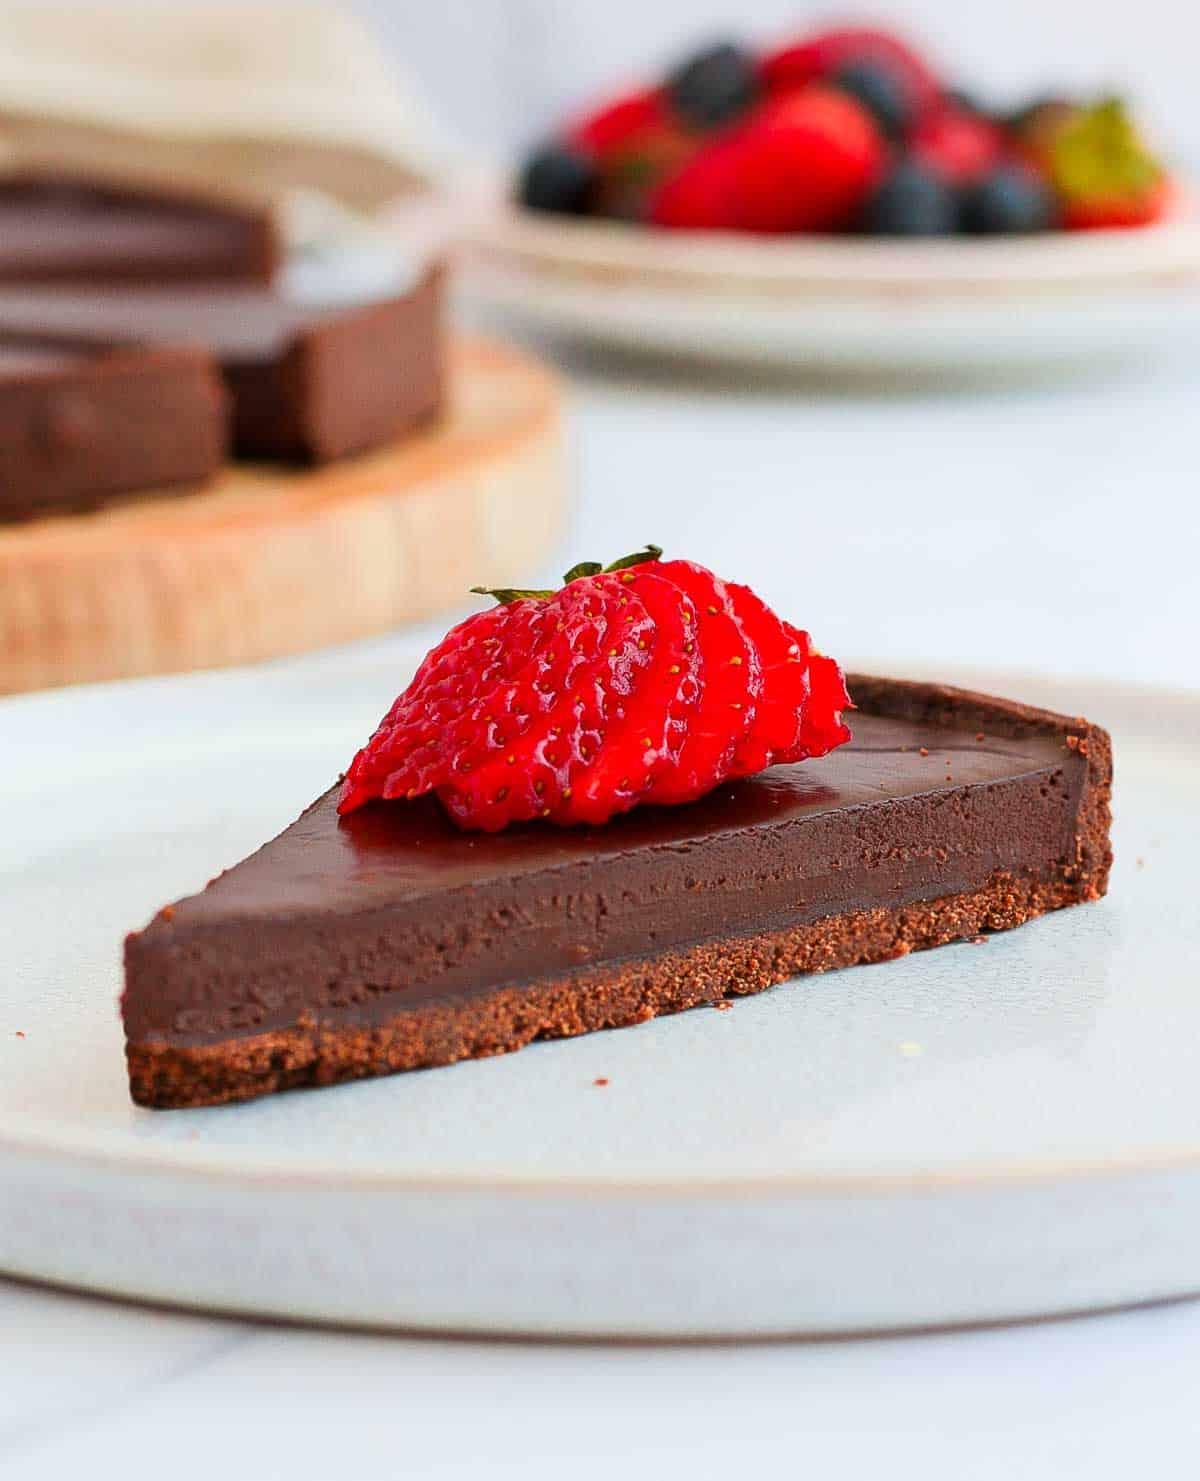 A slice of chocolate ganache tart topped with a strawberry on a white plate.